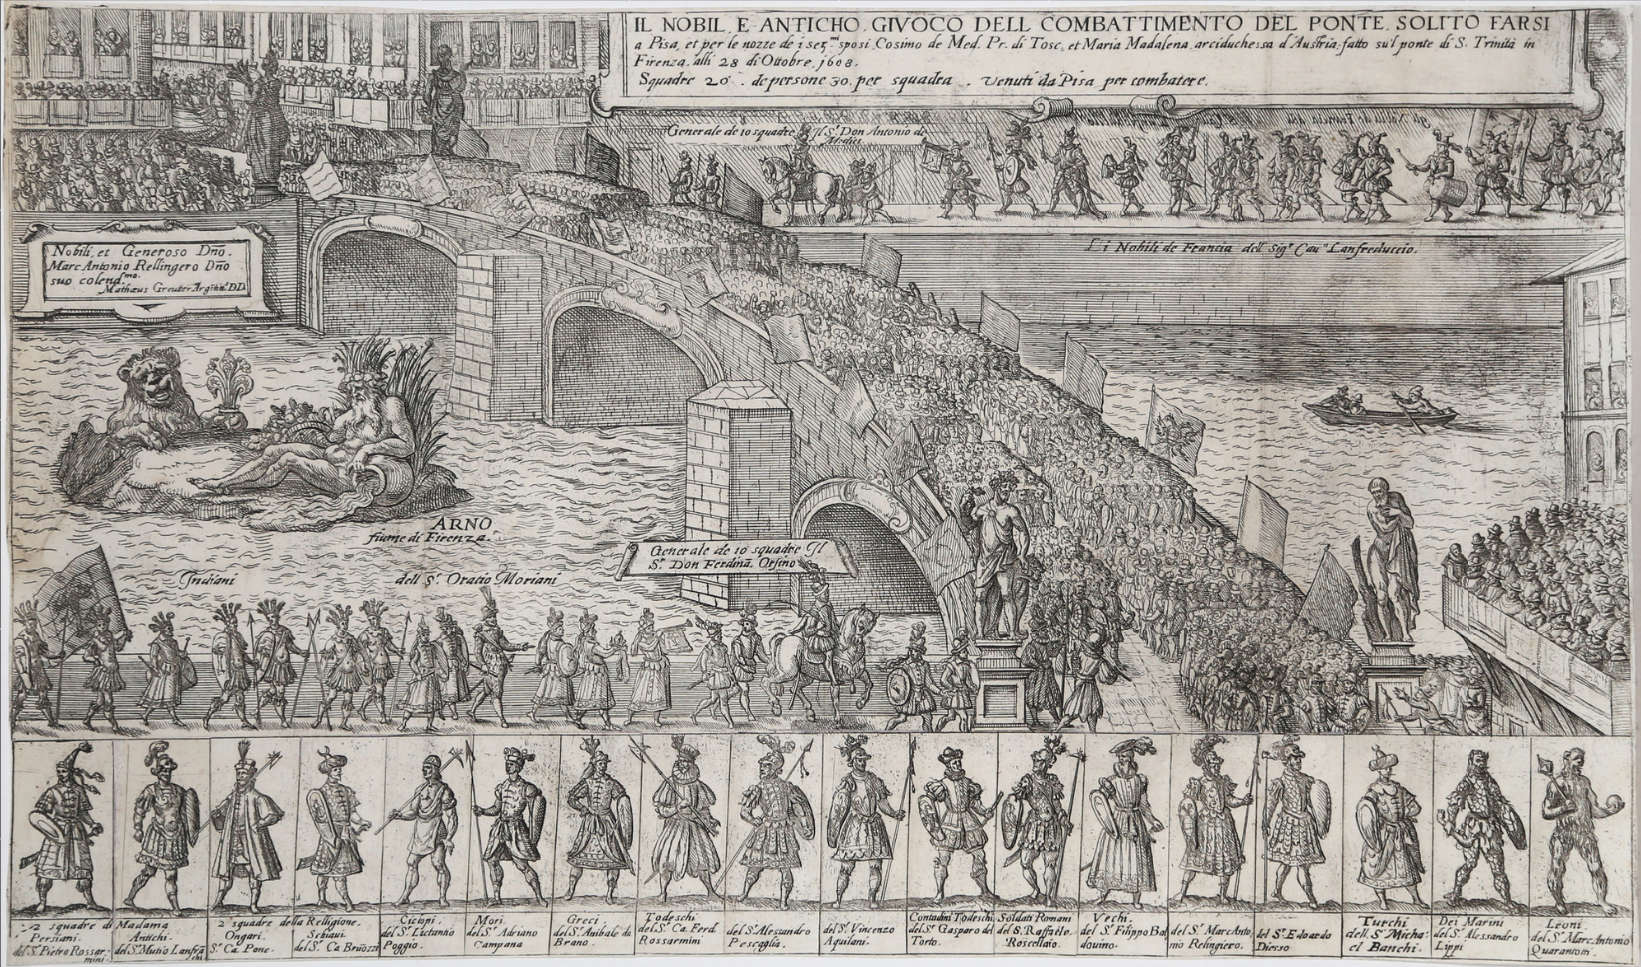 Matthäus Greuter, The noble and ancient game of bridge fighting usually made in Pisa... (1608; etching, 273 x 499 mm)